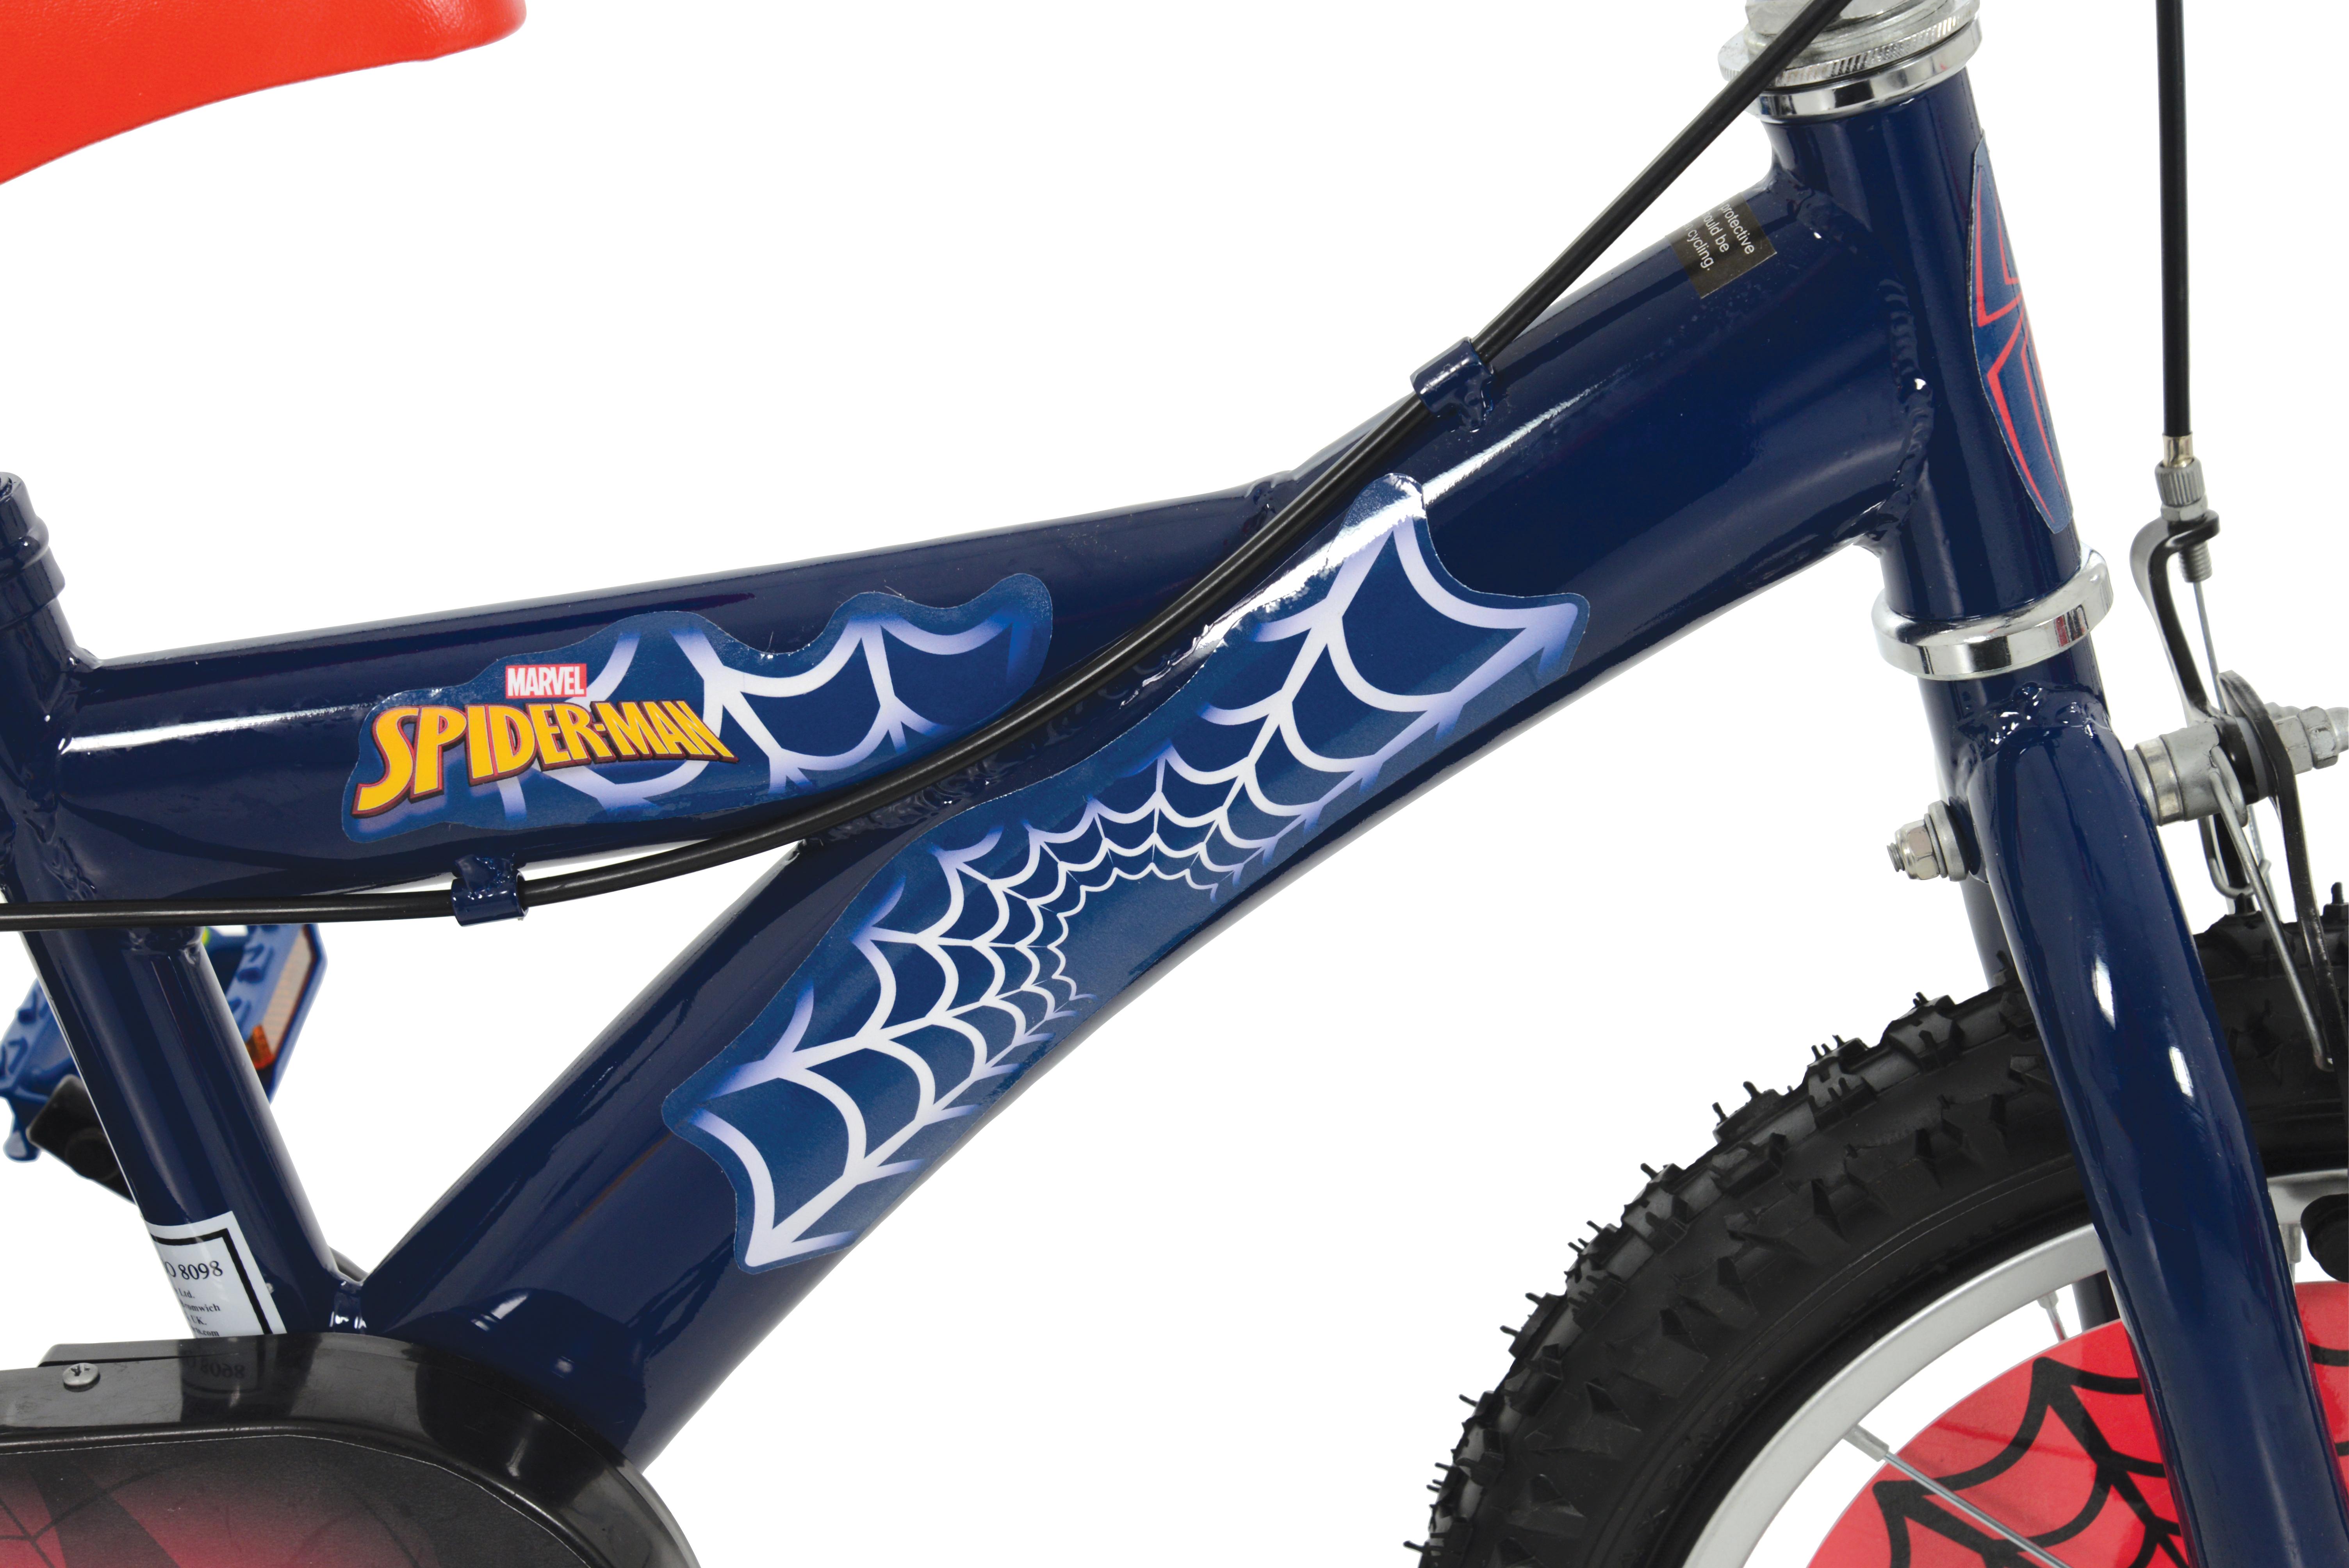 spider man bike for 7 year old